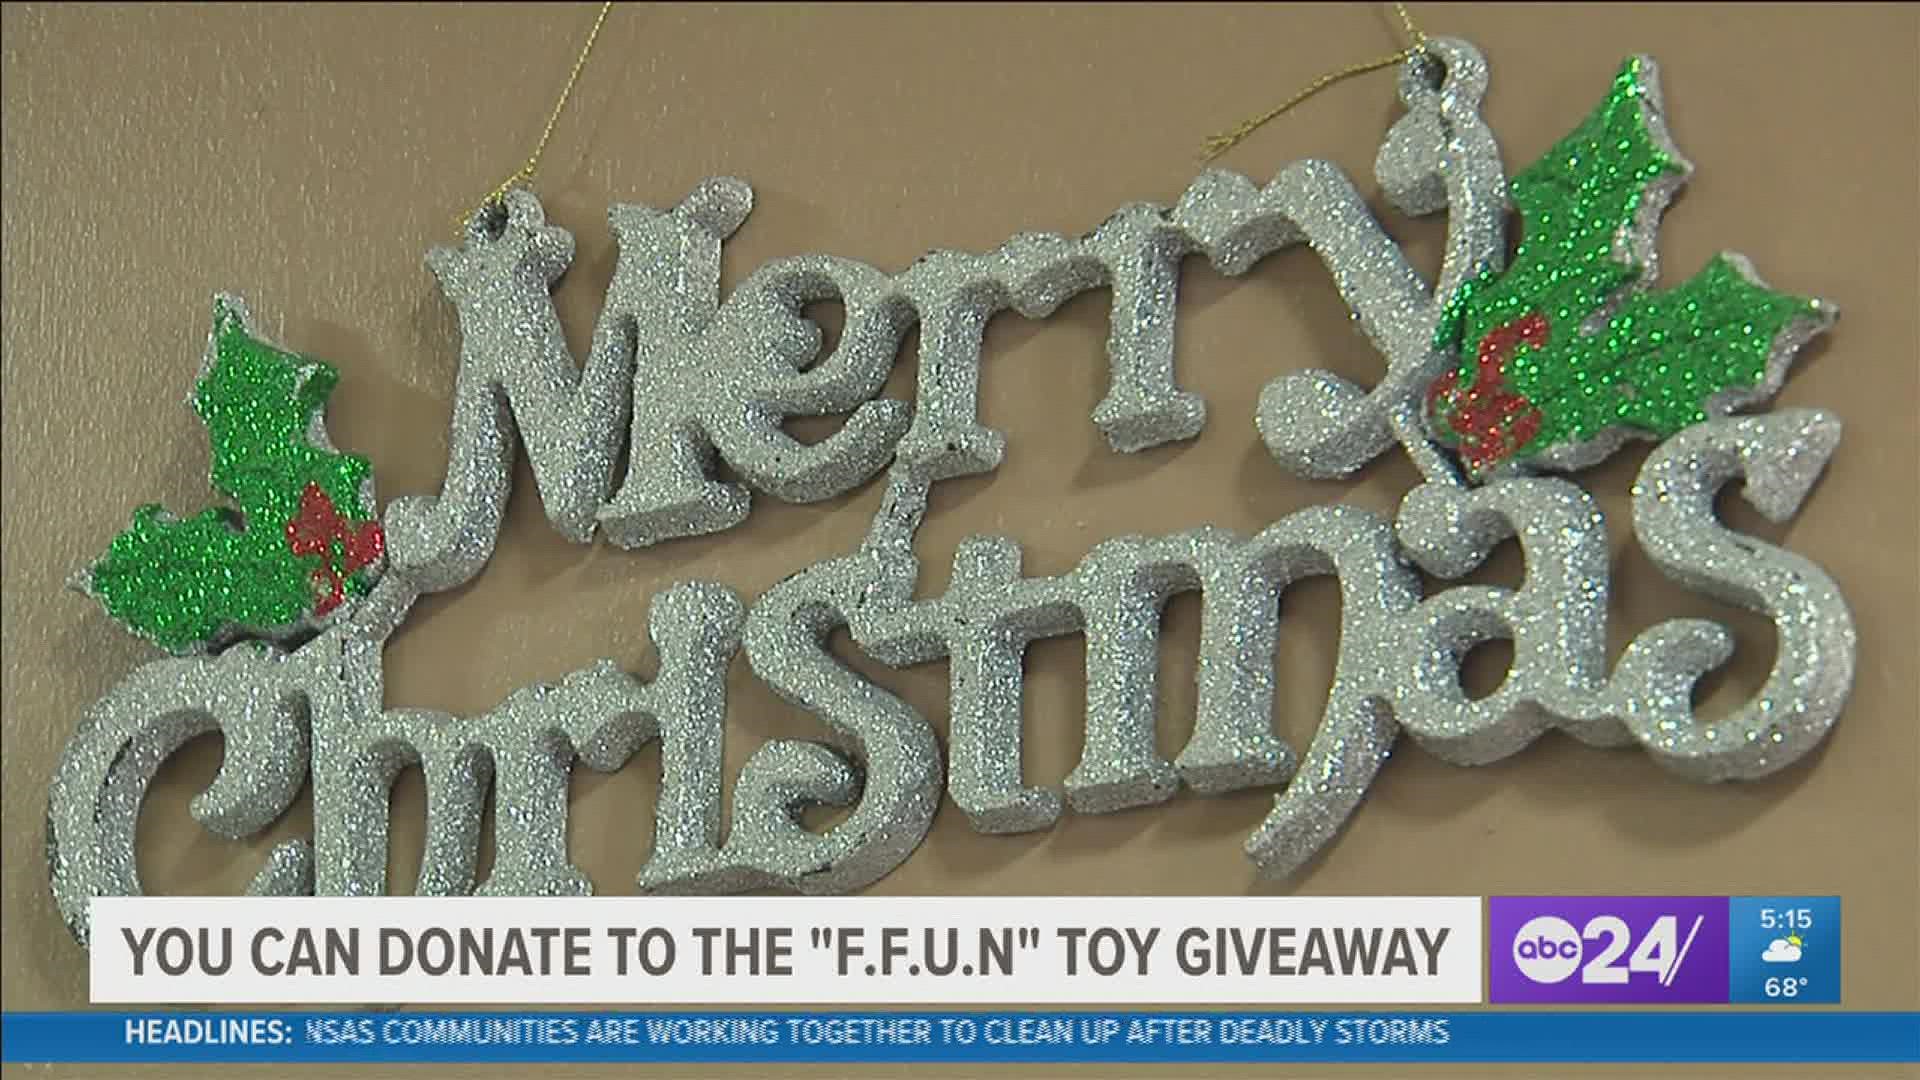 Freedom From Unnecessary Negatives, or FFUN, is collecting toys to hand out to children this weekend, and they need your help.